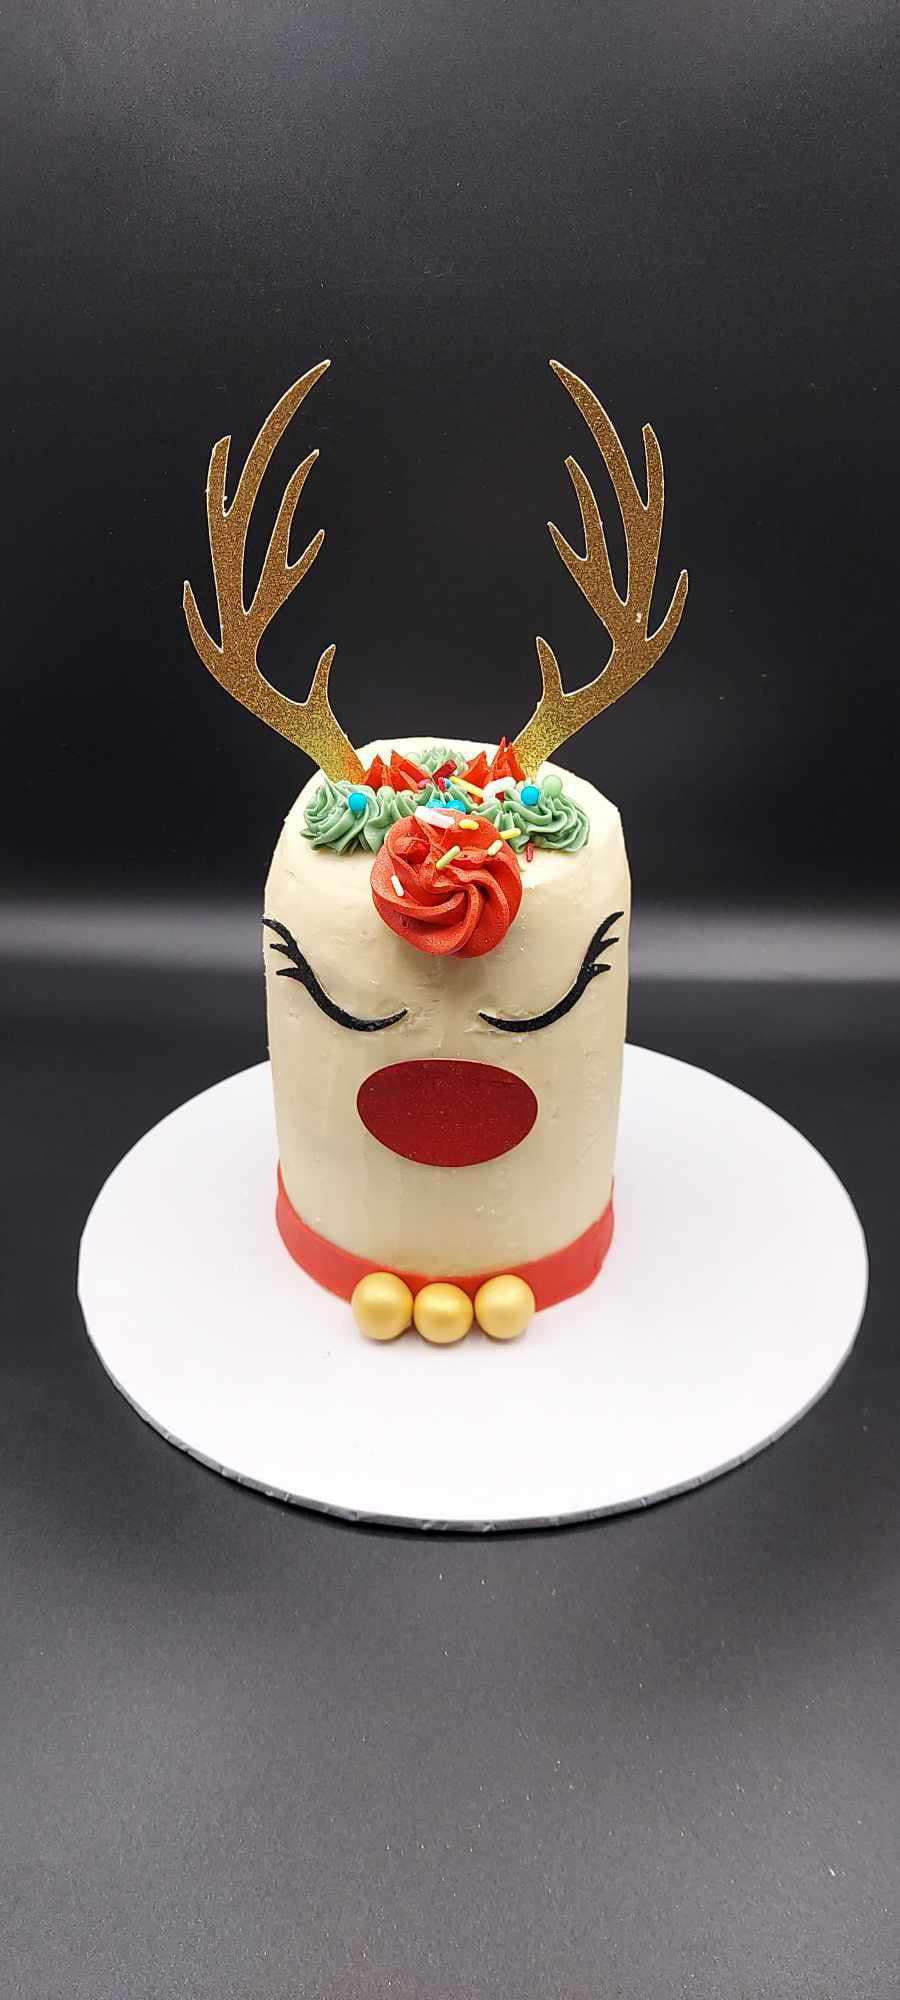 Reindeer Christmas Cake Topper set, Xmas Topper, Reindeer cake topper, reindeer topper, Christmas cake topper charms